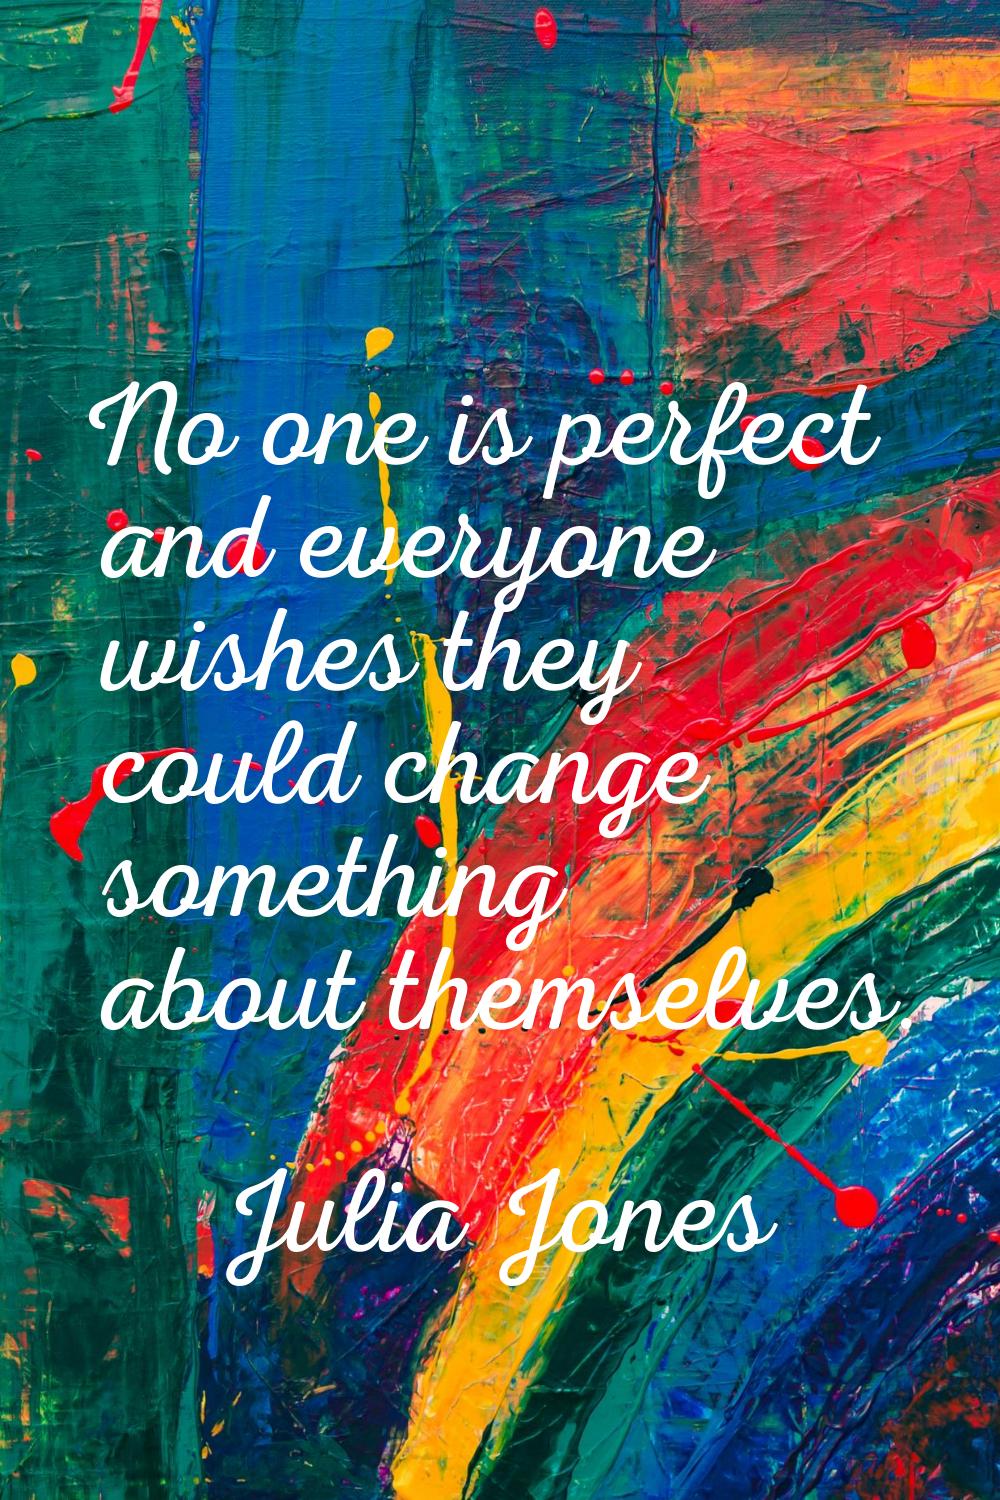 No one is perfect and everyone wishes they could change something about themselves.